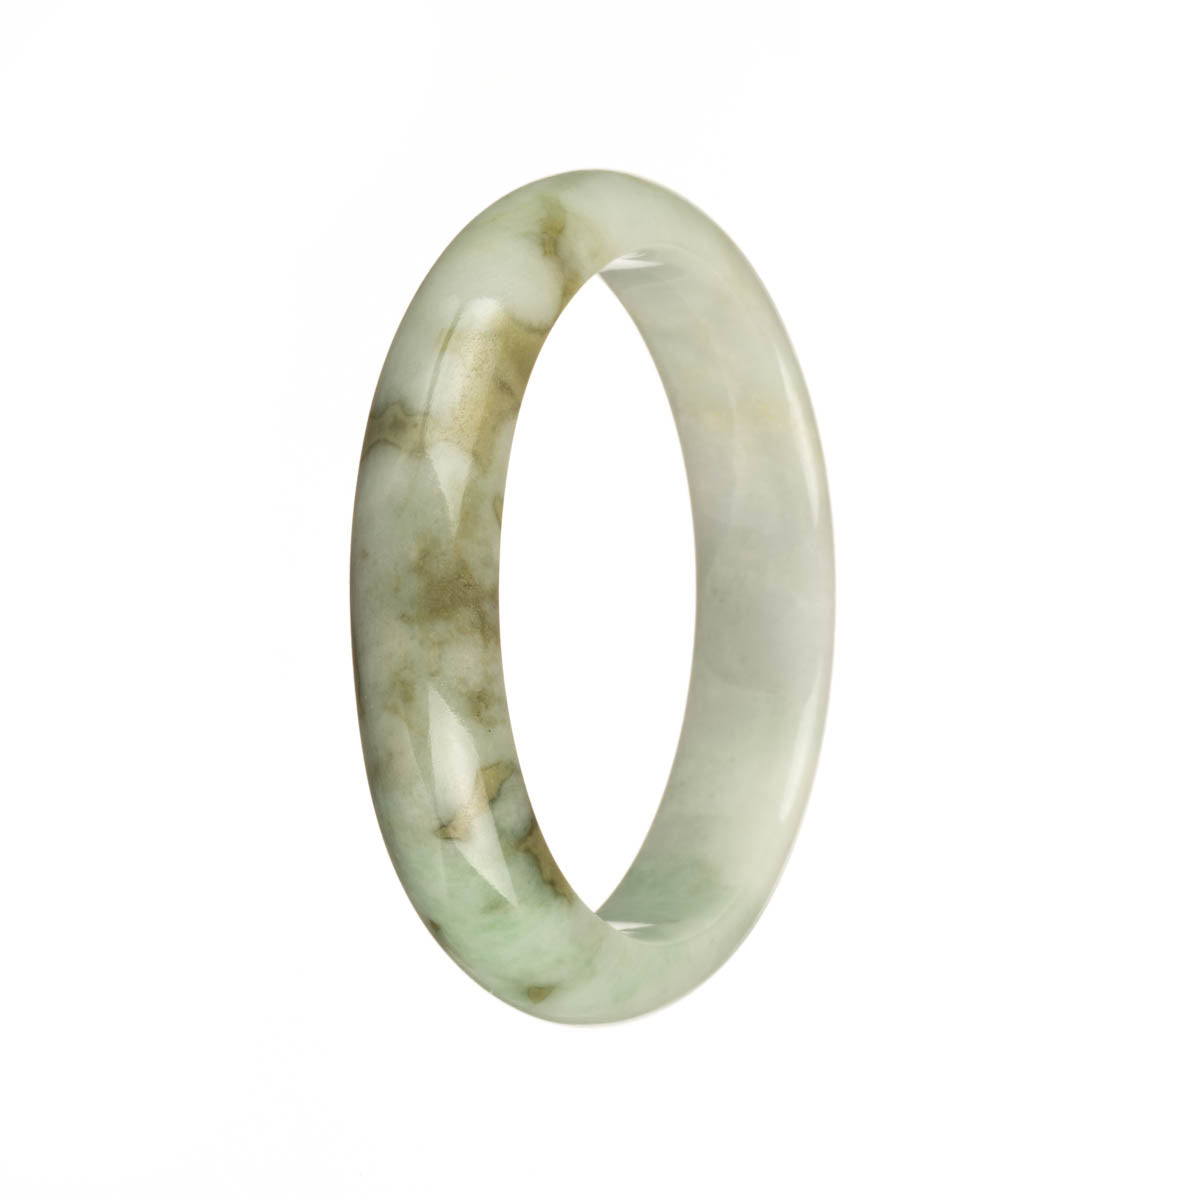 A close-up of a beautiful white jadeite bracelet with green and brown patterns. The bracelet is in the shape of a 54mm half moon.